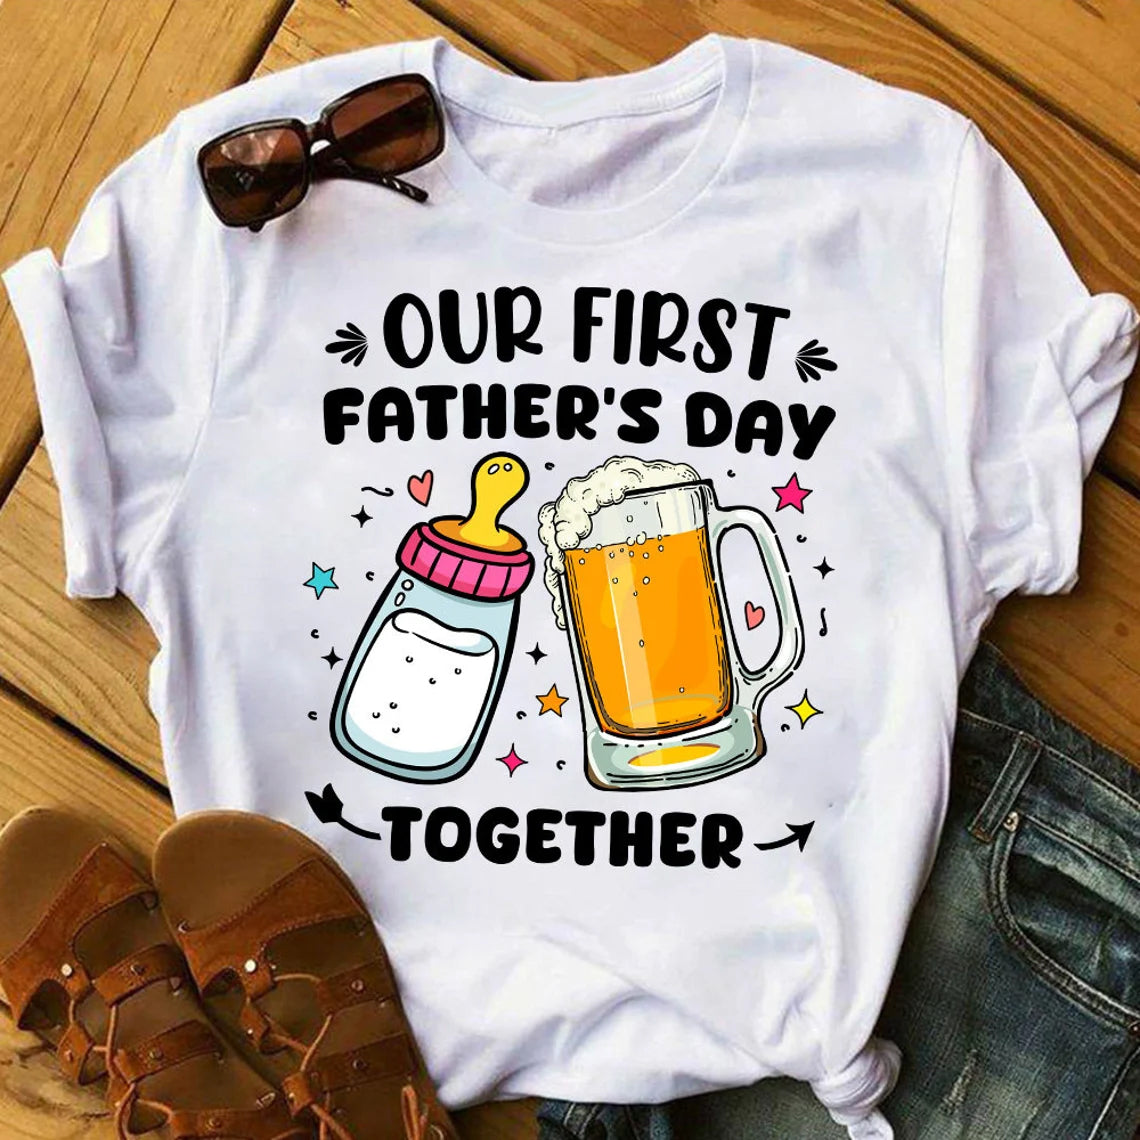 Father and Child Matching 100% Cotton T-Shirts - Our First Father's Day Together